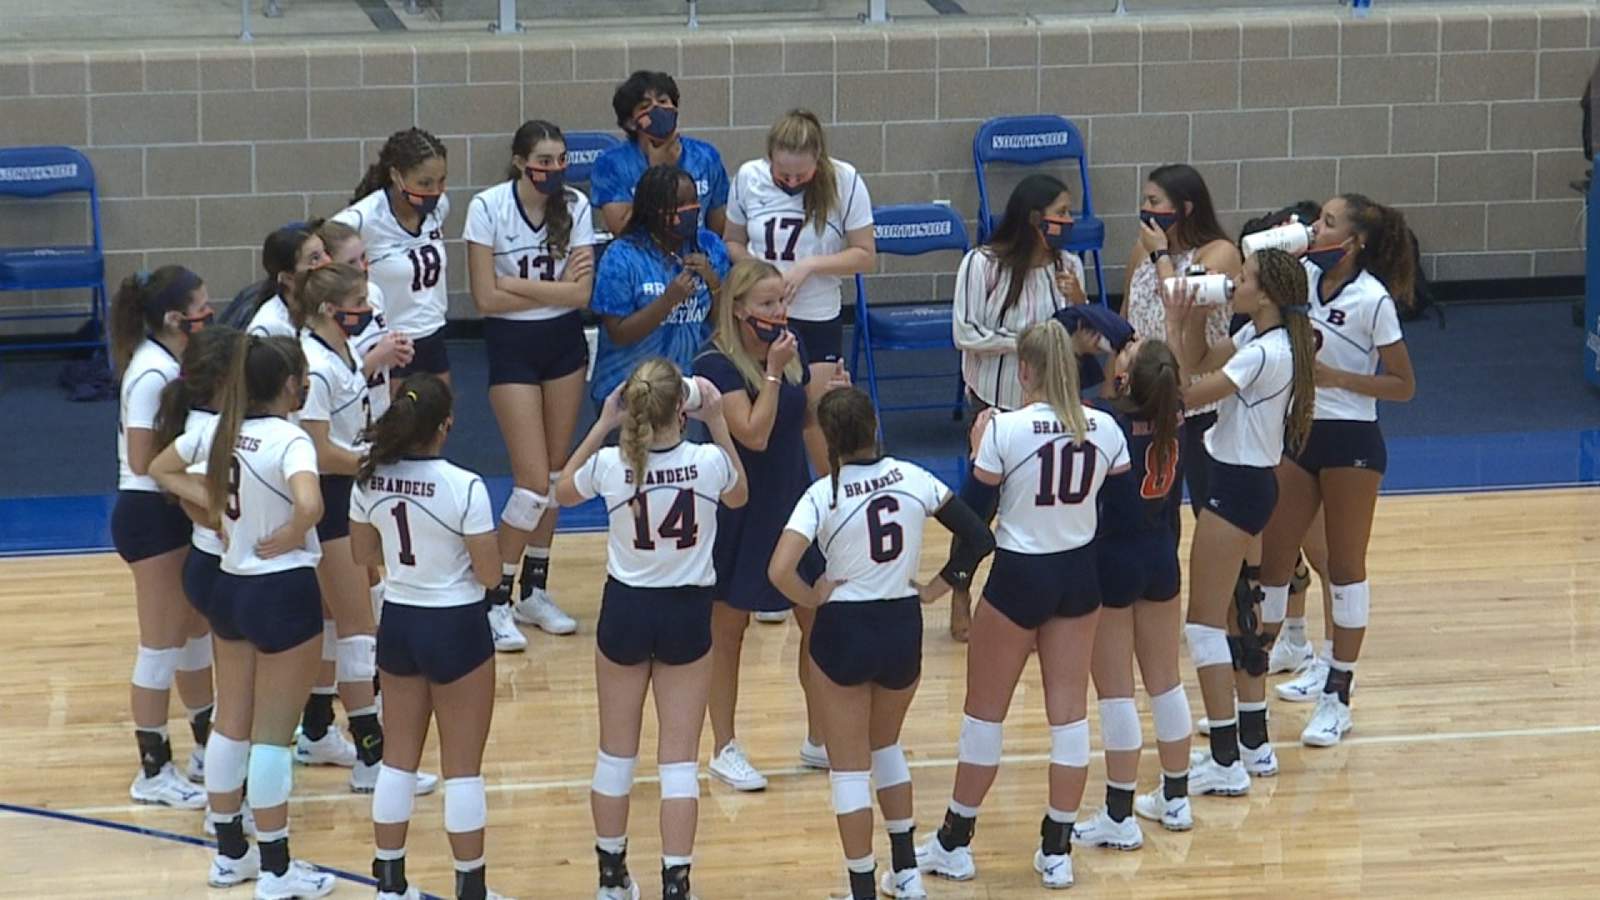 Brandeis volleyball sweeps District 28-6A rival Clark in season opener